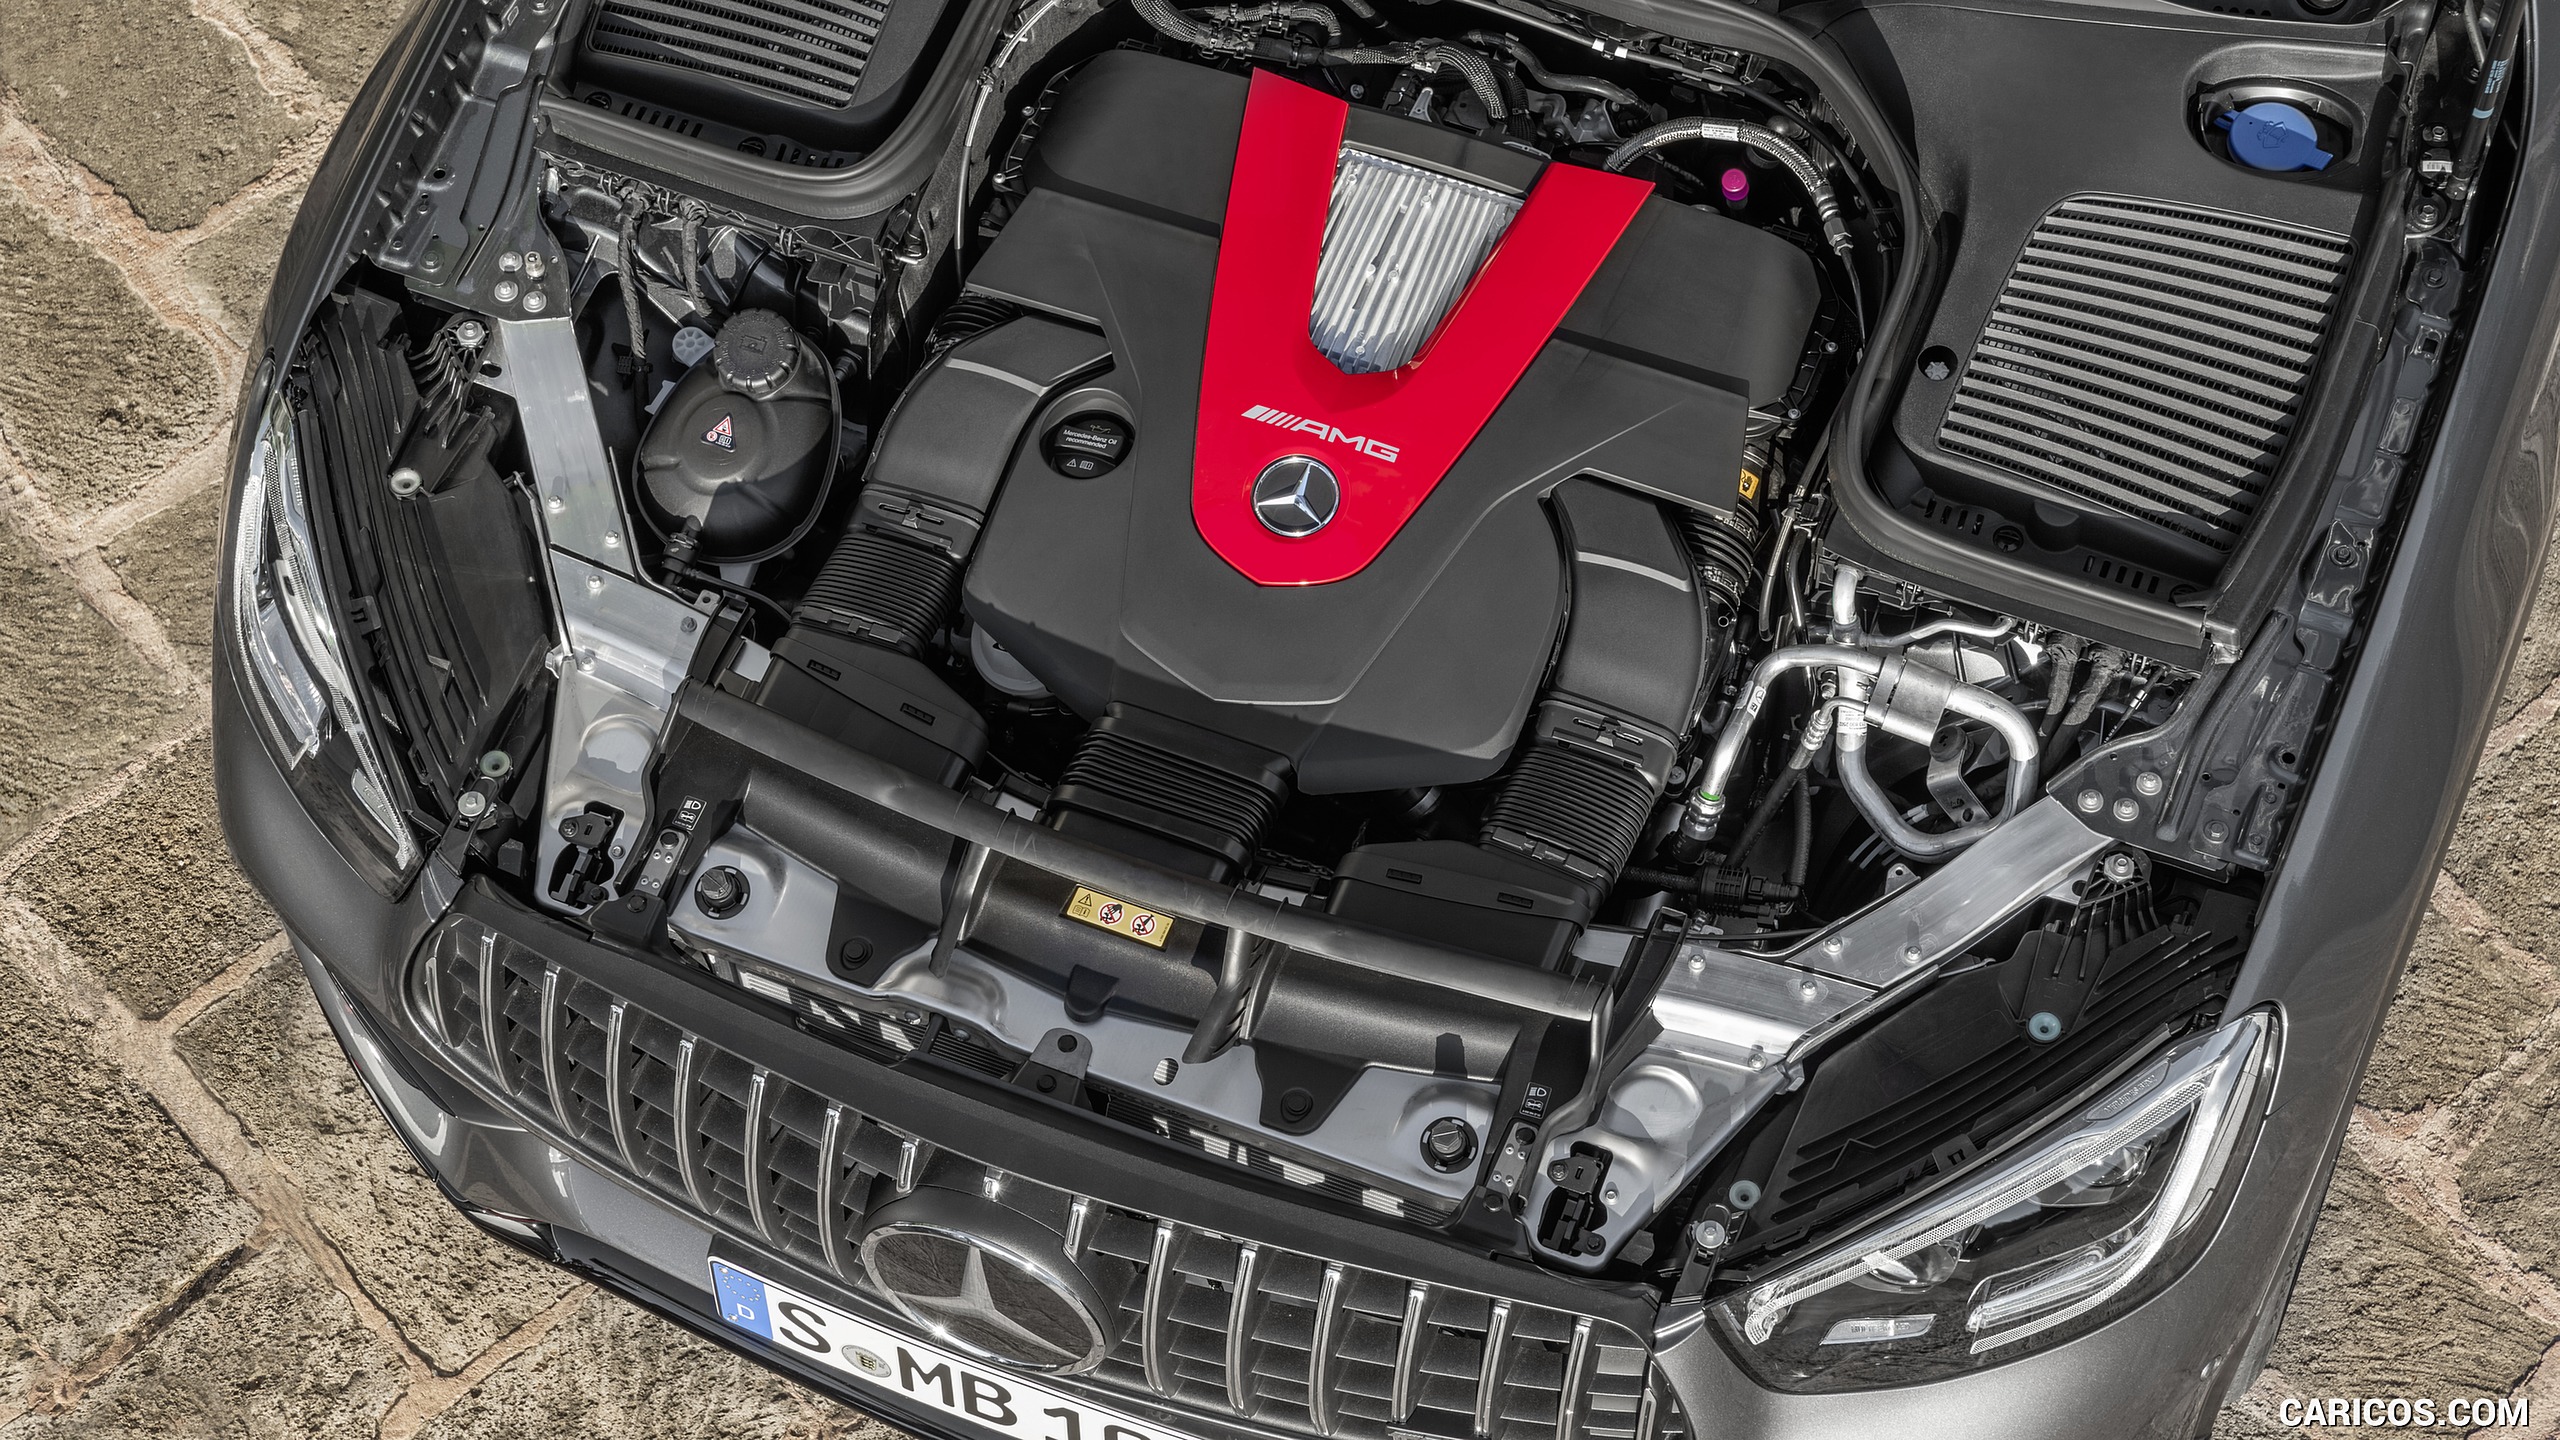 2020 Mercedes-AMG GLC 43 4MATIC Coupe - Engine, #25 of 173